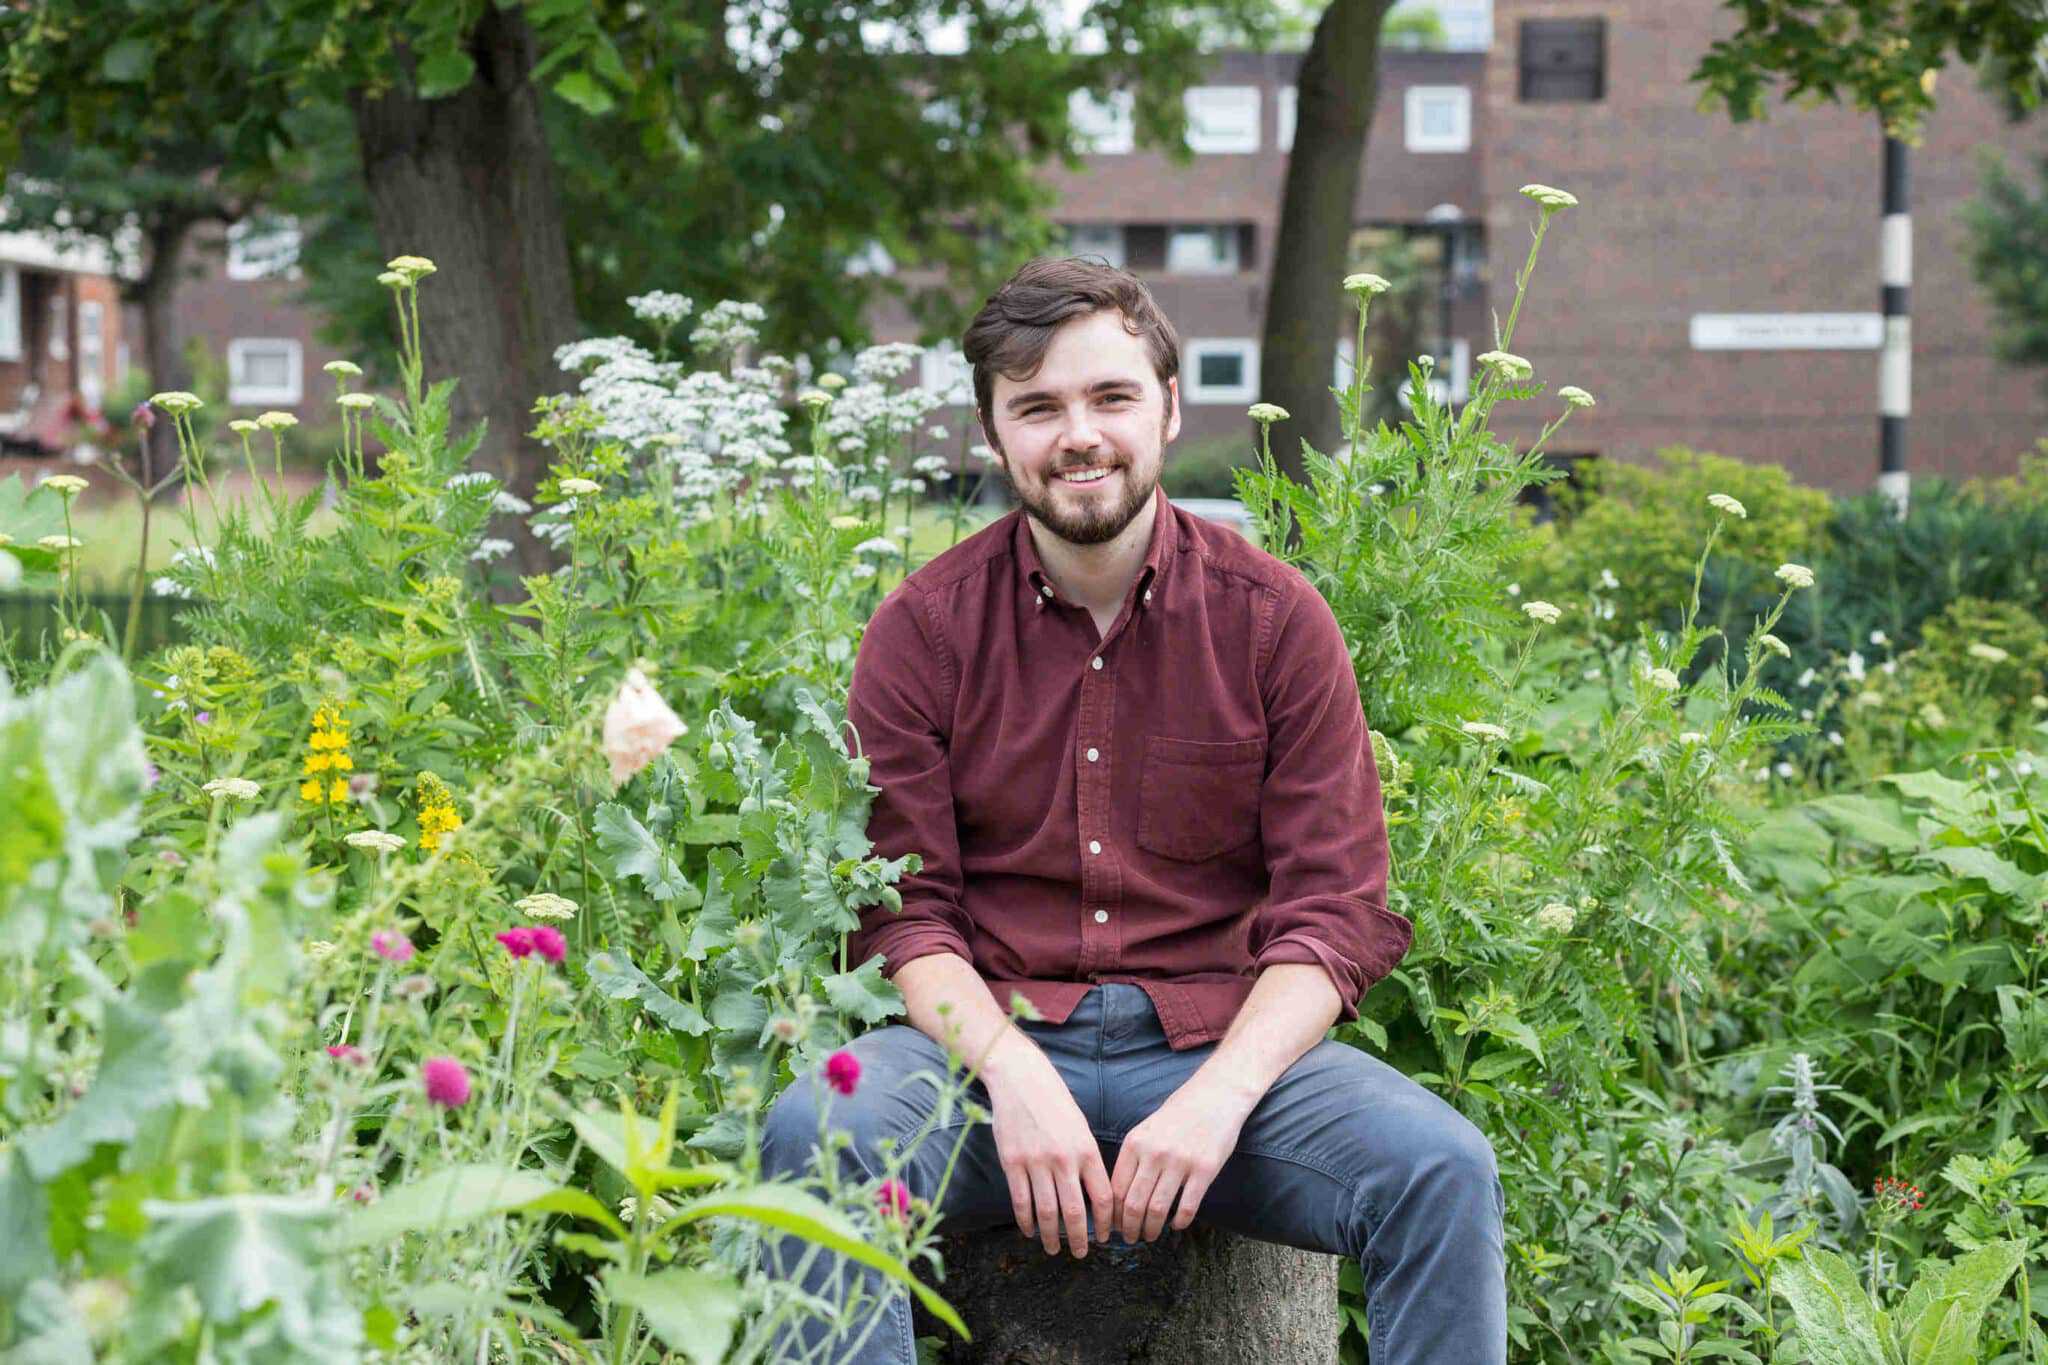 Joe is sat on a tree stump in the midst of a wildflower garden. In the distance is a block of red brick flats and a black and white sign post. Joe is wearing a red shirt and blue chinos.